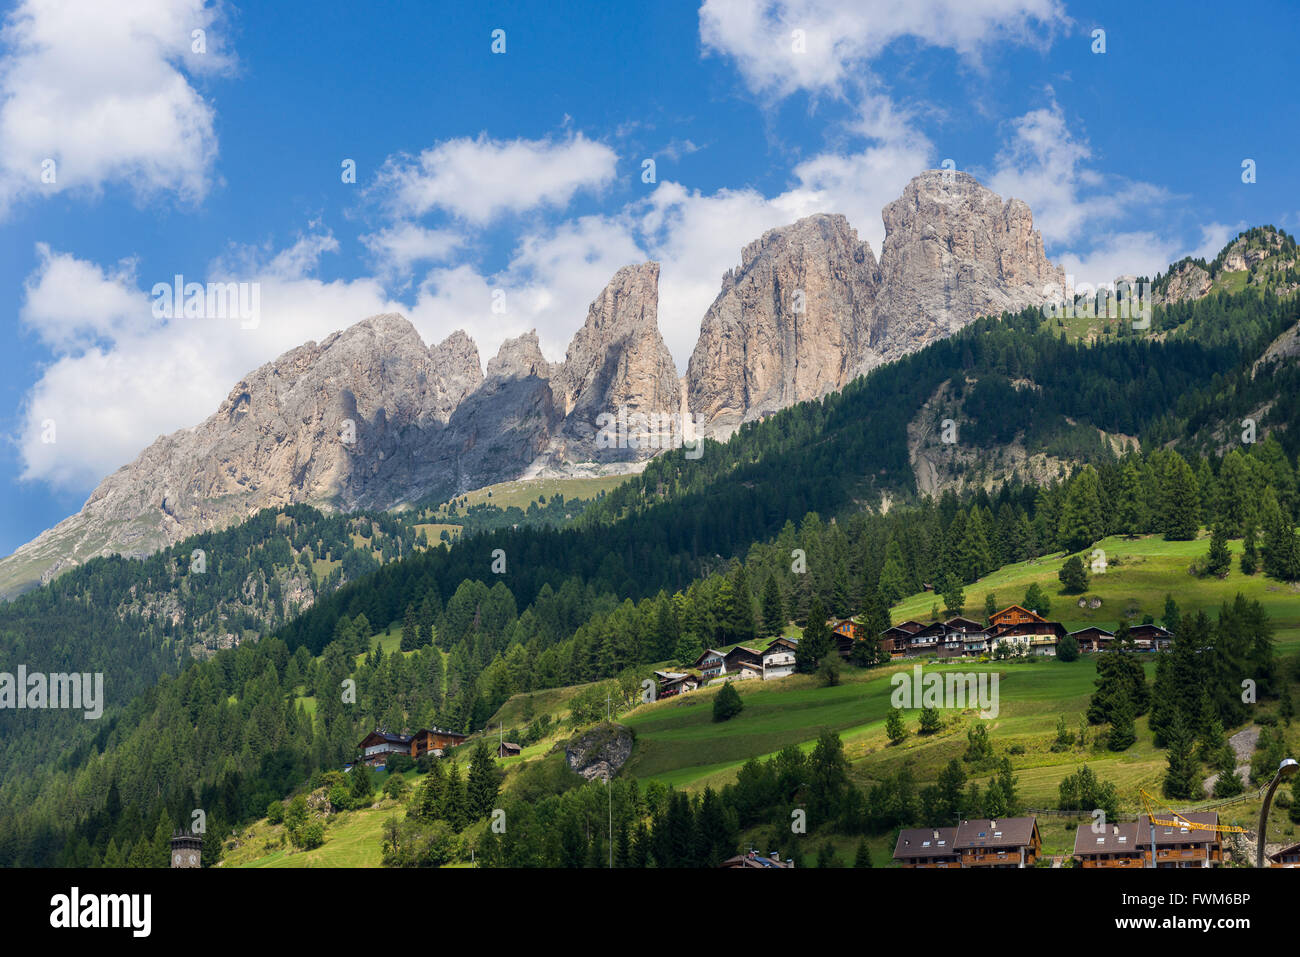 View in the dolomitic landscape in the Fassa Valley Stock Photo